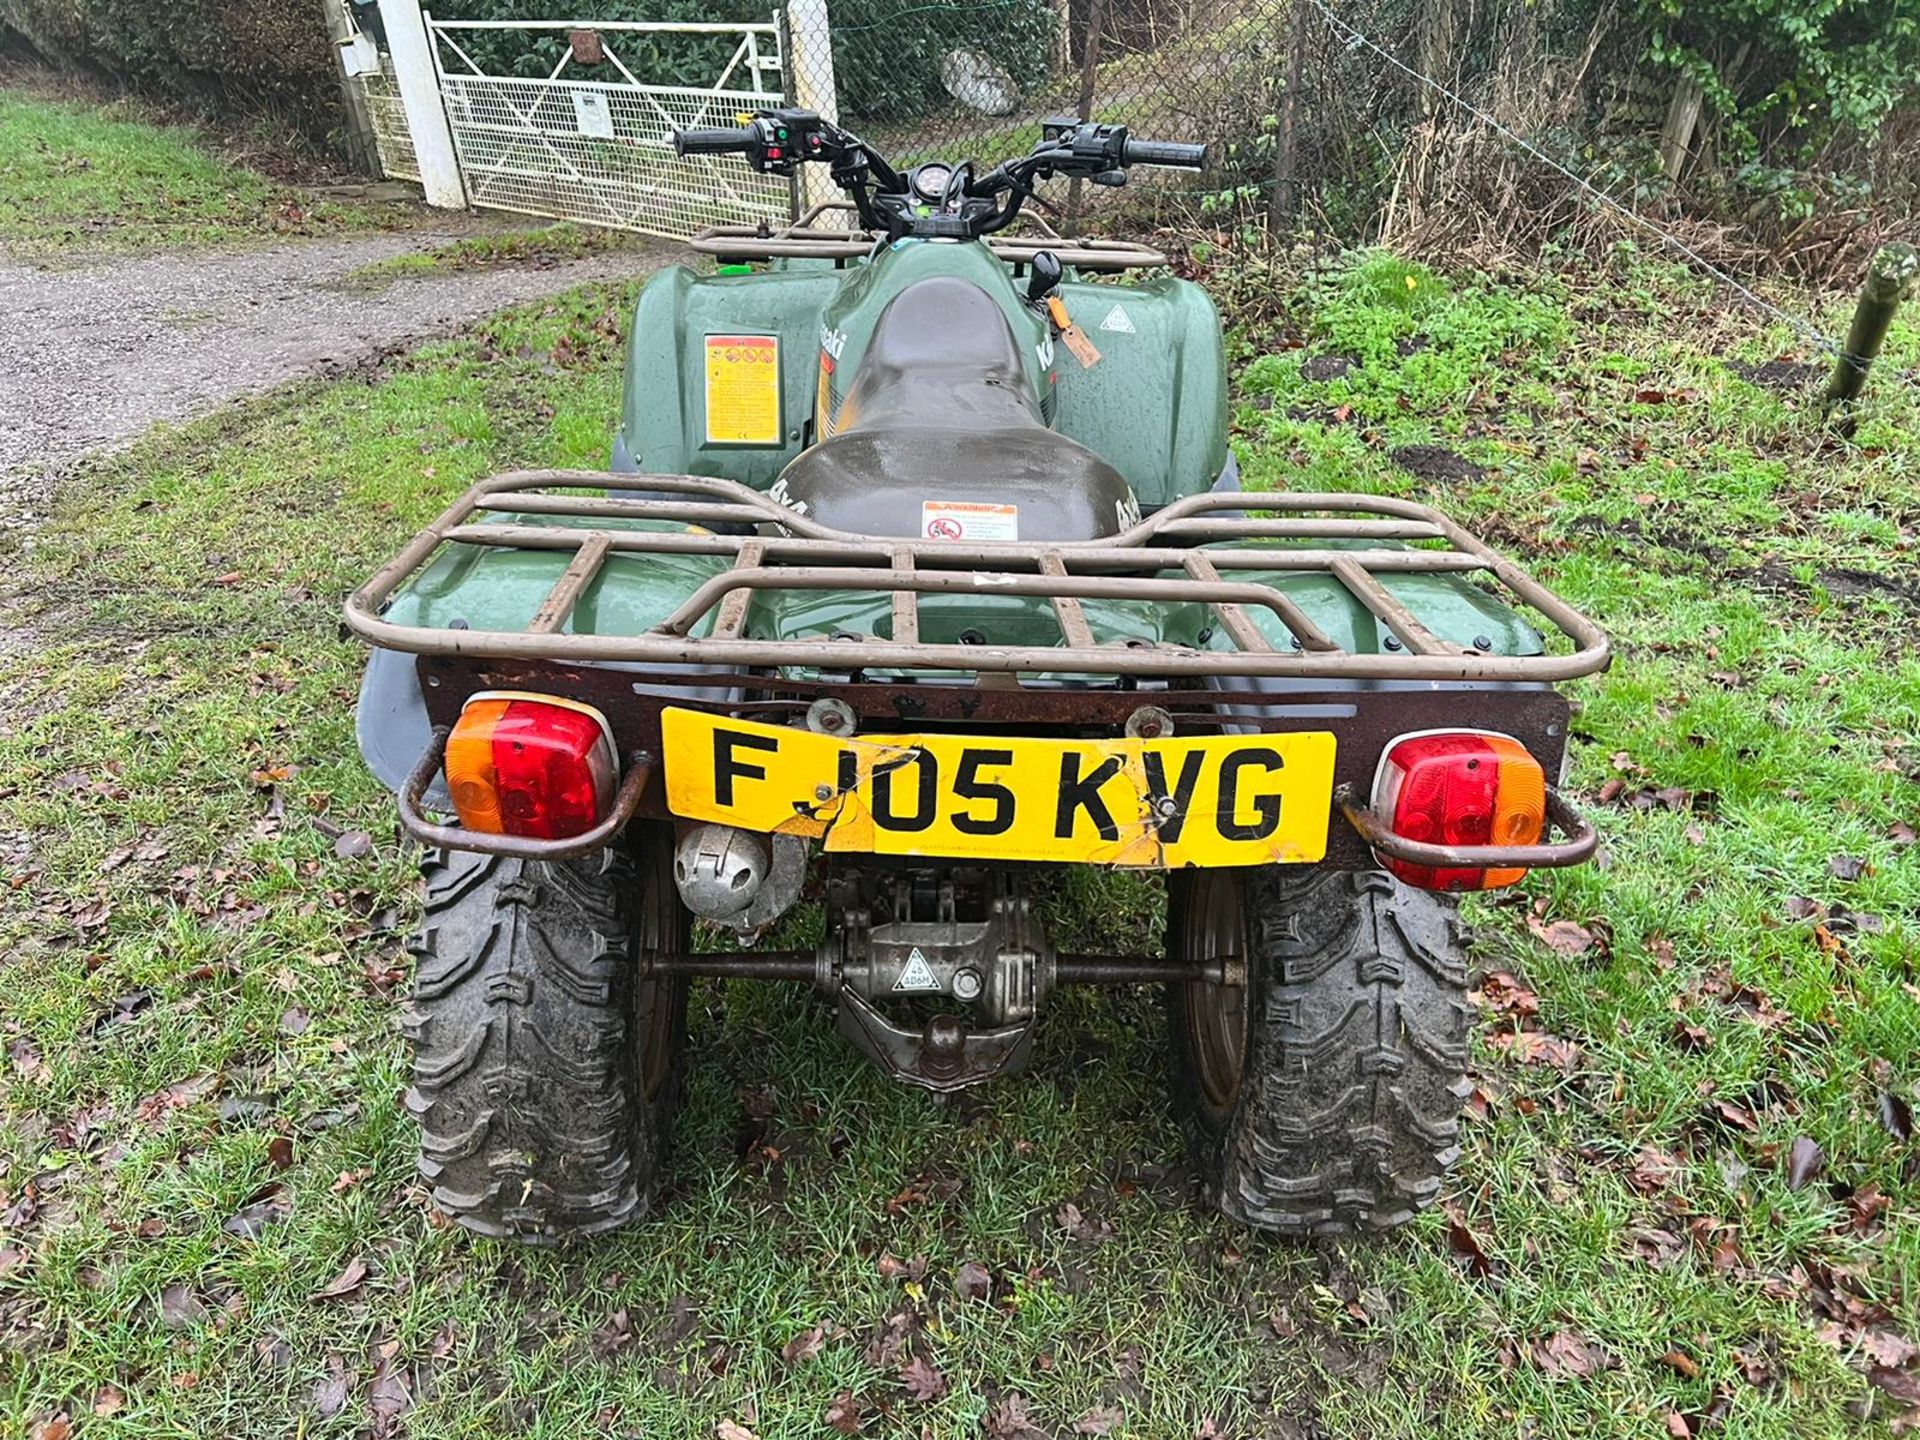 KAWASAKI KVF360 4WD FARM QUAD BIKE, RUNS AND DRIVES WELL, SHOWING A LOW 3438 HOURS PLUS VAT* - Image 6 of 13